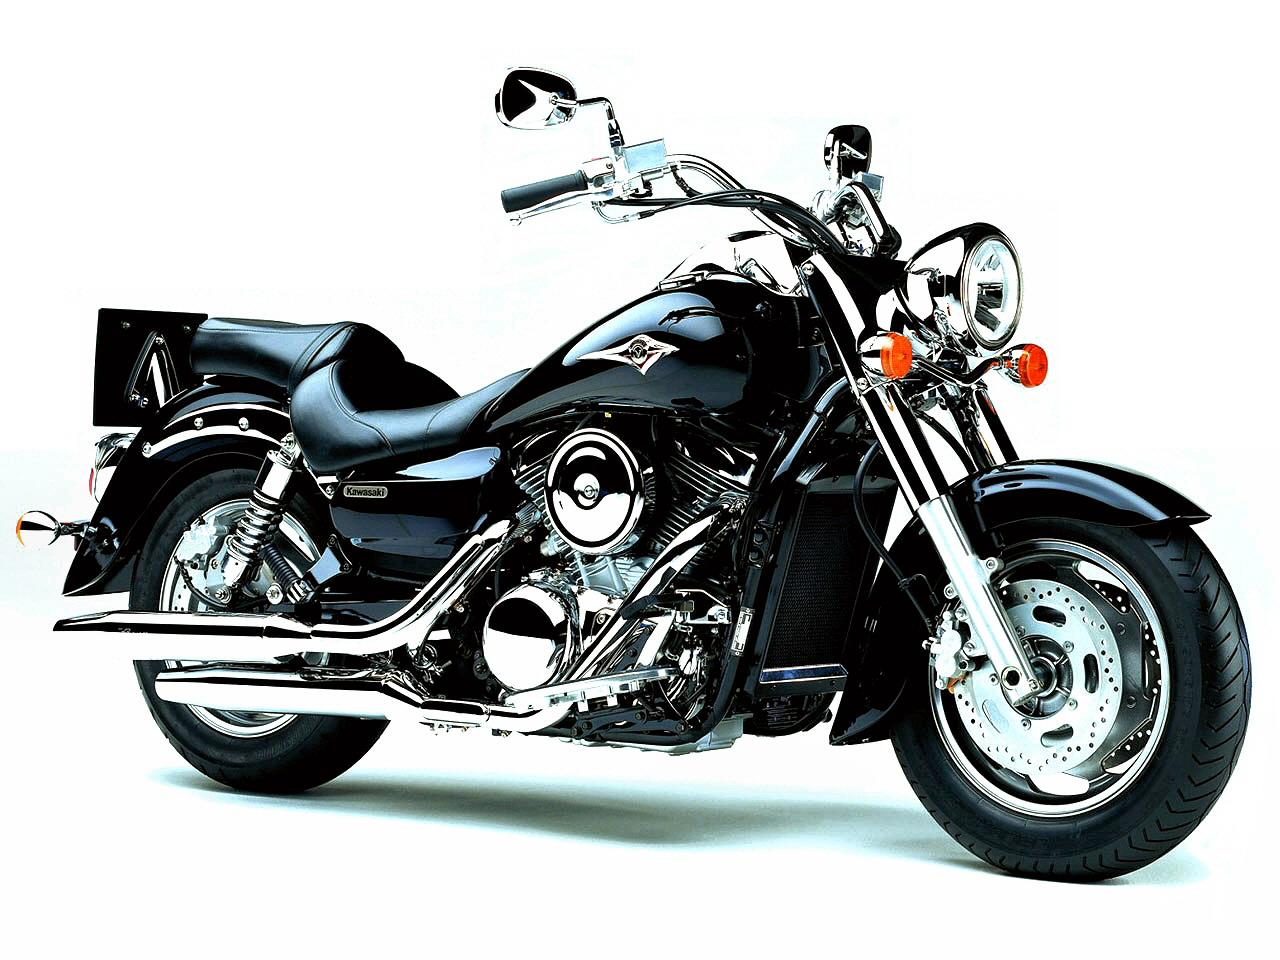 Cool Motorcycle 7714 Hd Wallpapers In Bikes   Imagesci Com